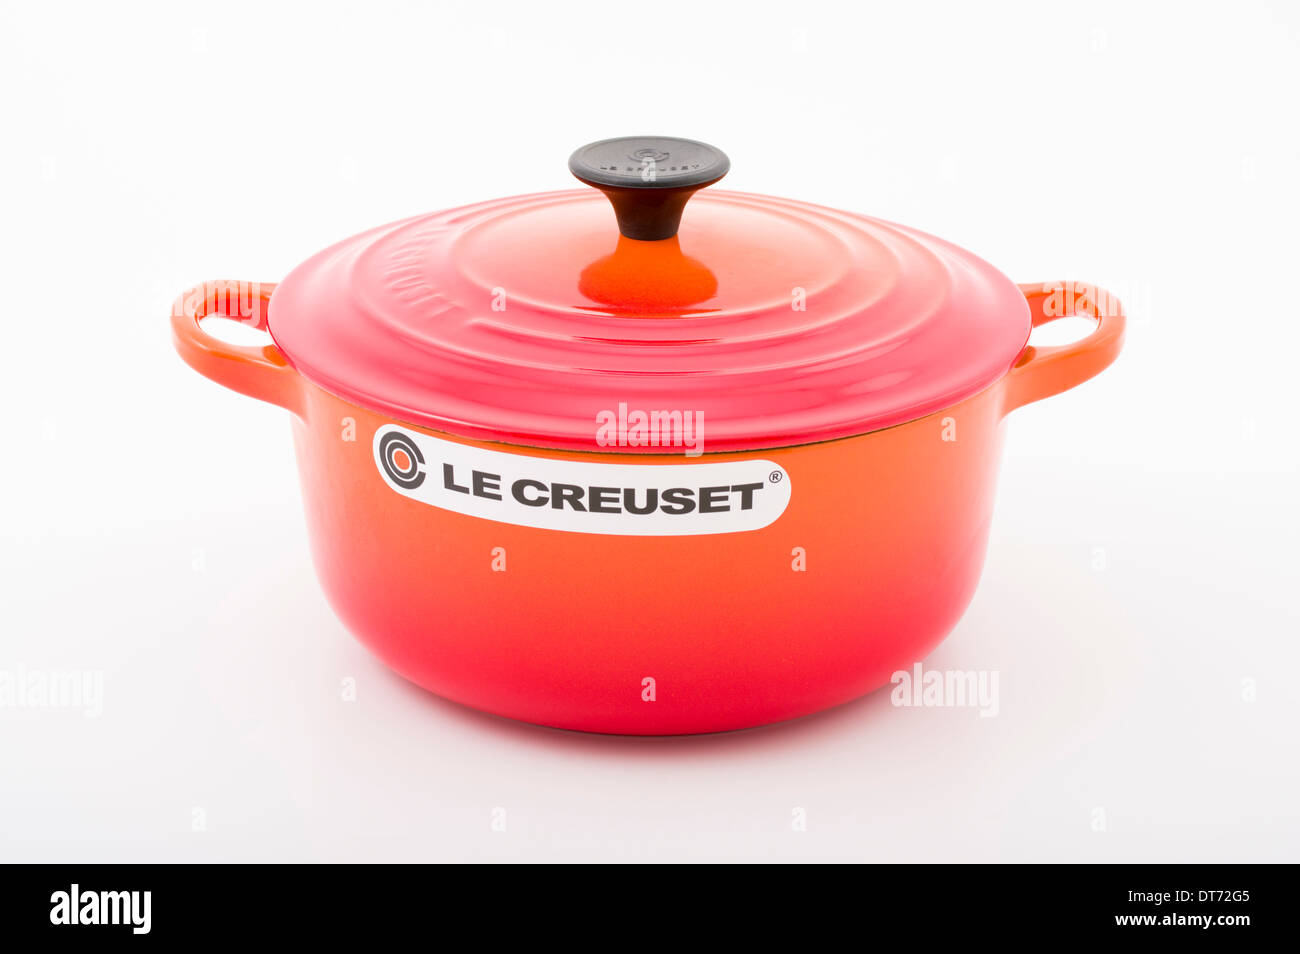 Le Creuset cast iron cast-iron French cookware with orange enamel. French oven / Casserole dish Stock Photo